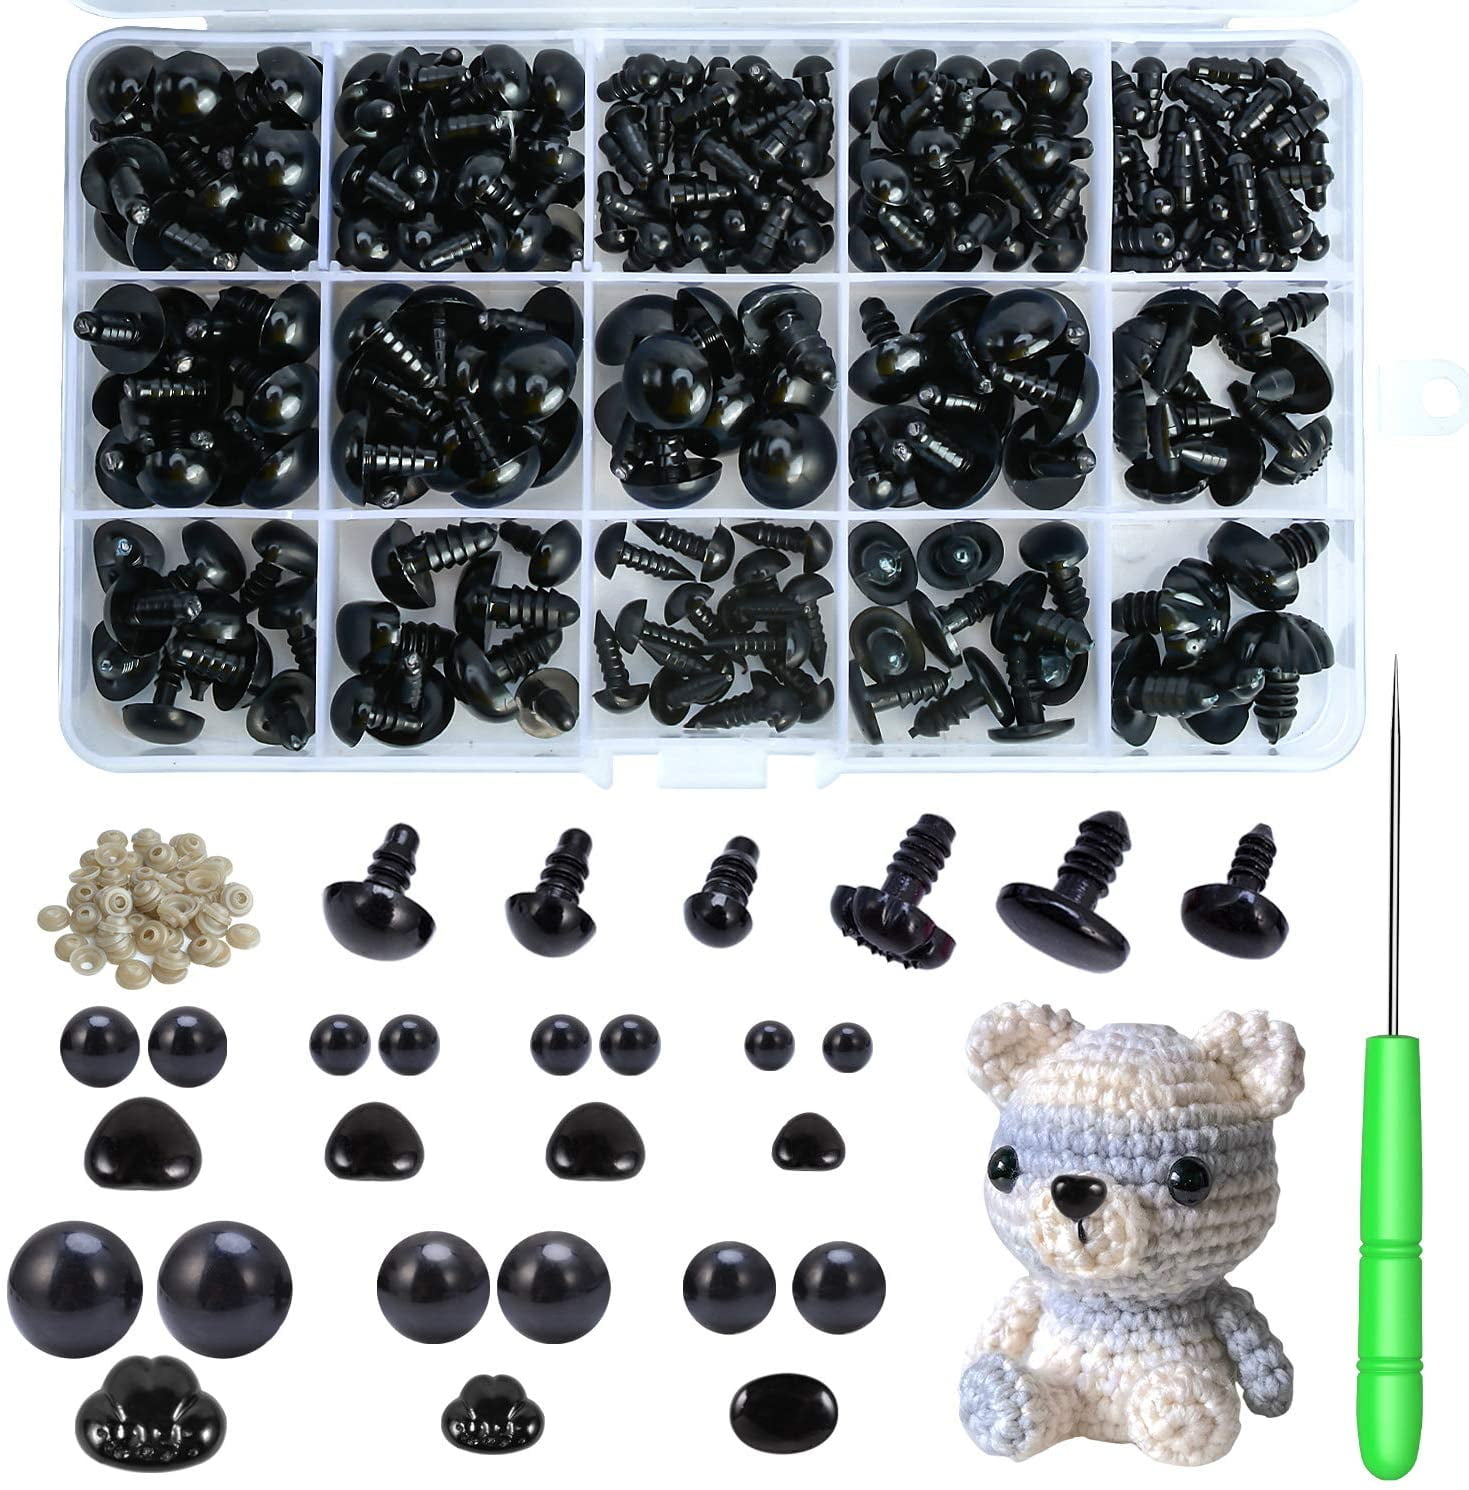 Safety Eyes and Noses with Washers 592pcs for Puppet Doll, Teddy Bear, Stuffed Animals, Crafts, Crochet Toy